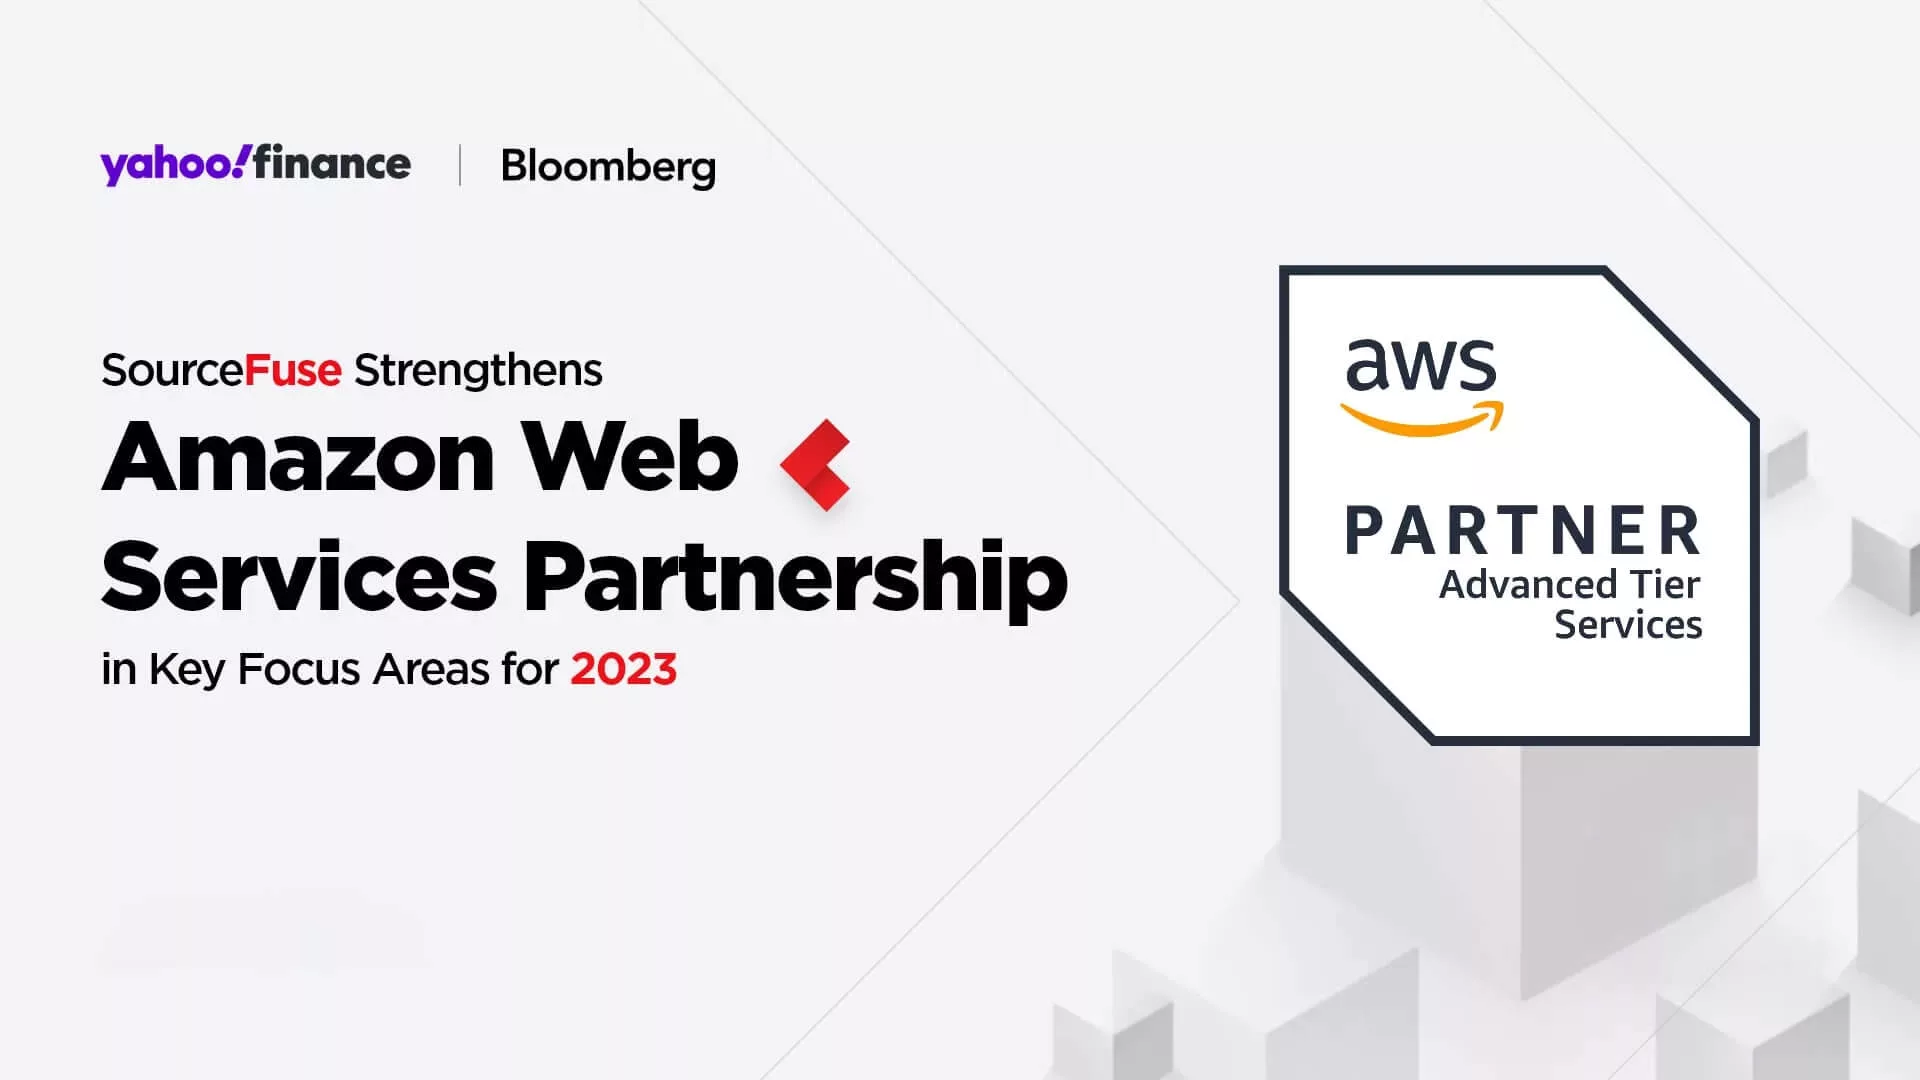 Discover How SourceFuse Plans to Take Its AWS Partnership to the Next Level